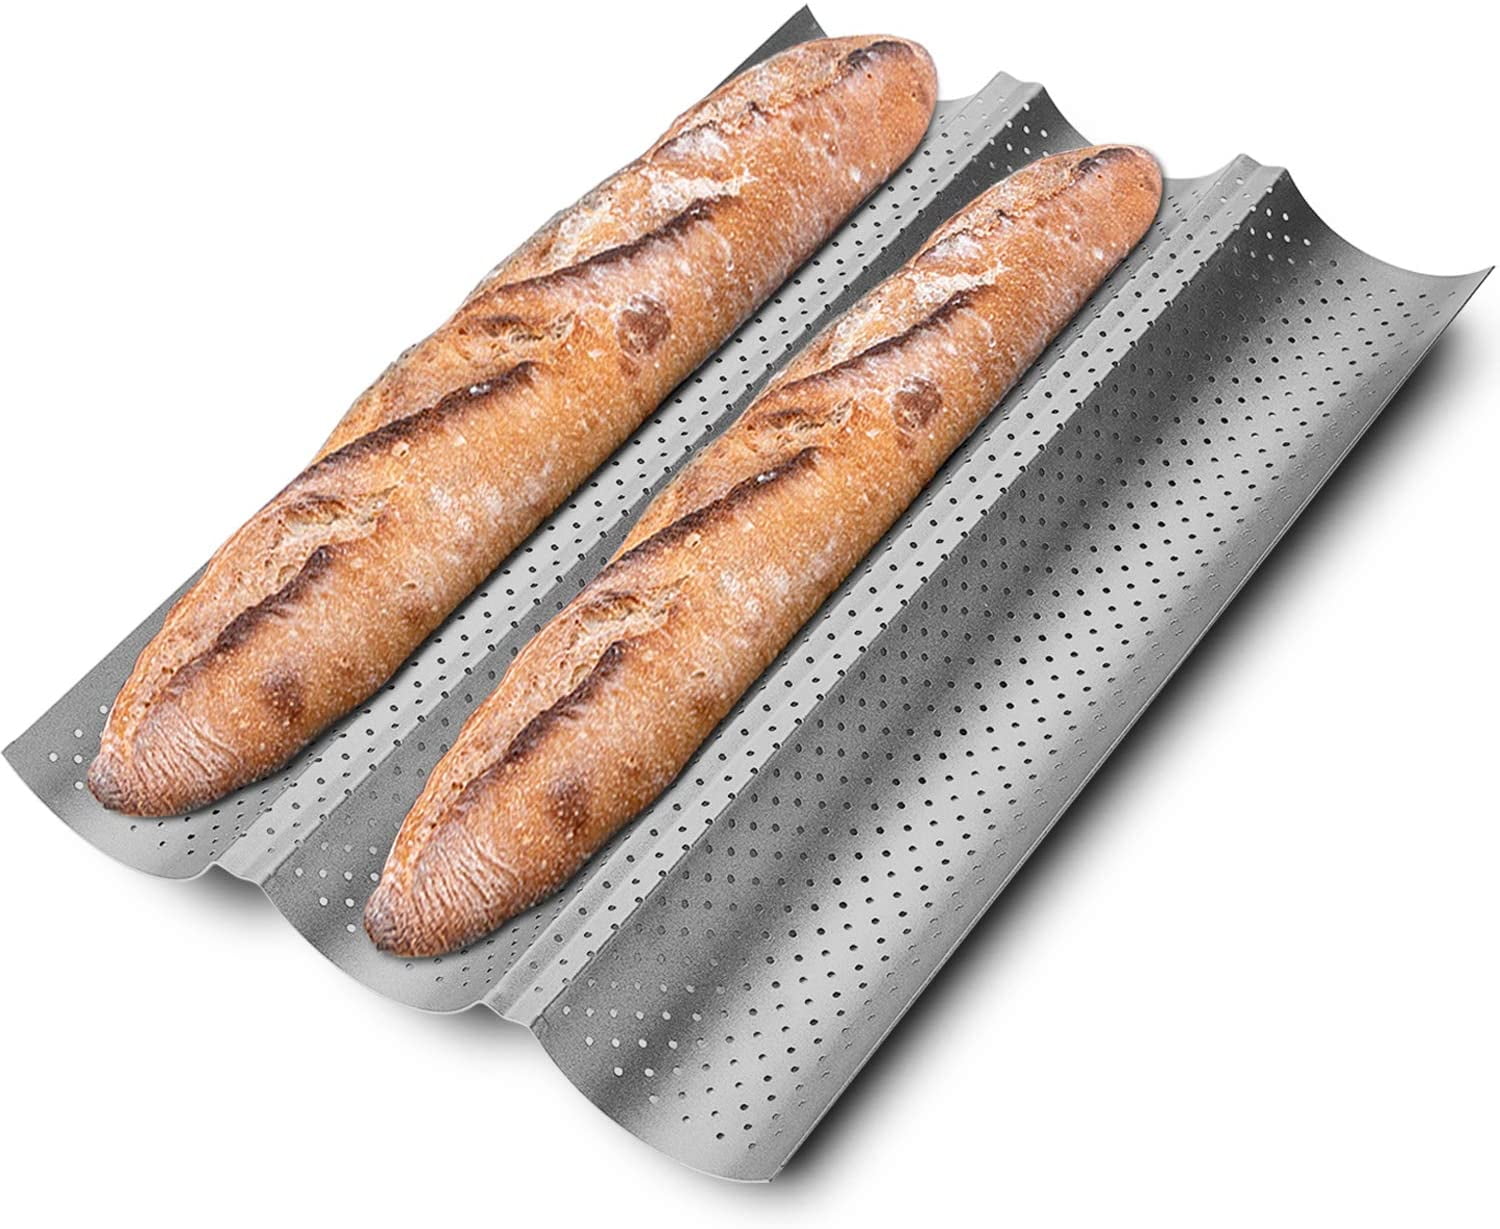 1pc Baguette Baking Tray Perforated Non Stick Bake Loaf Mould baguette pan 